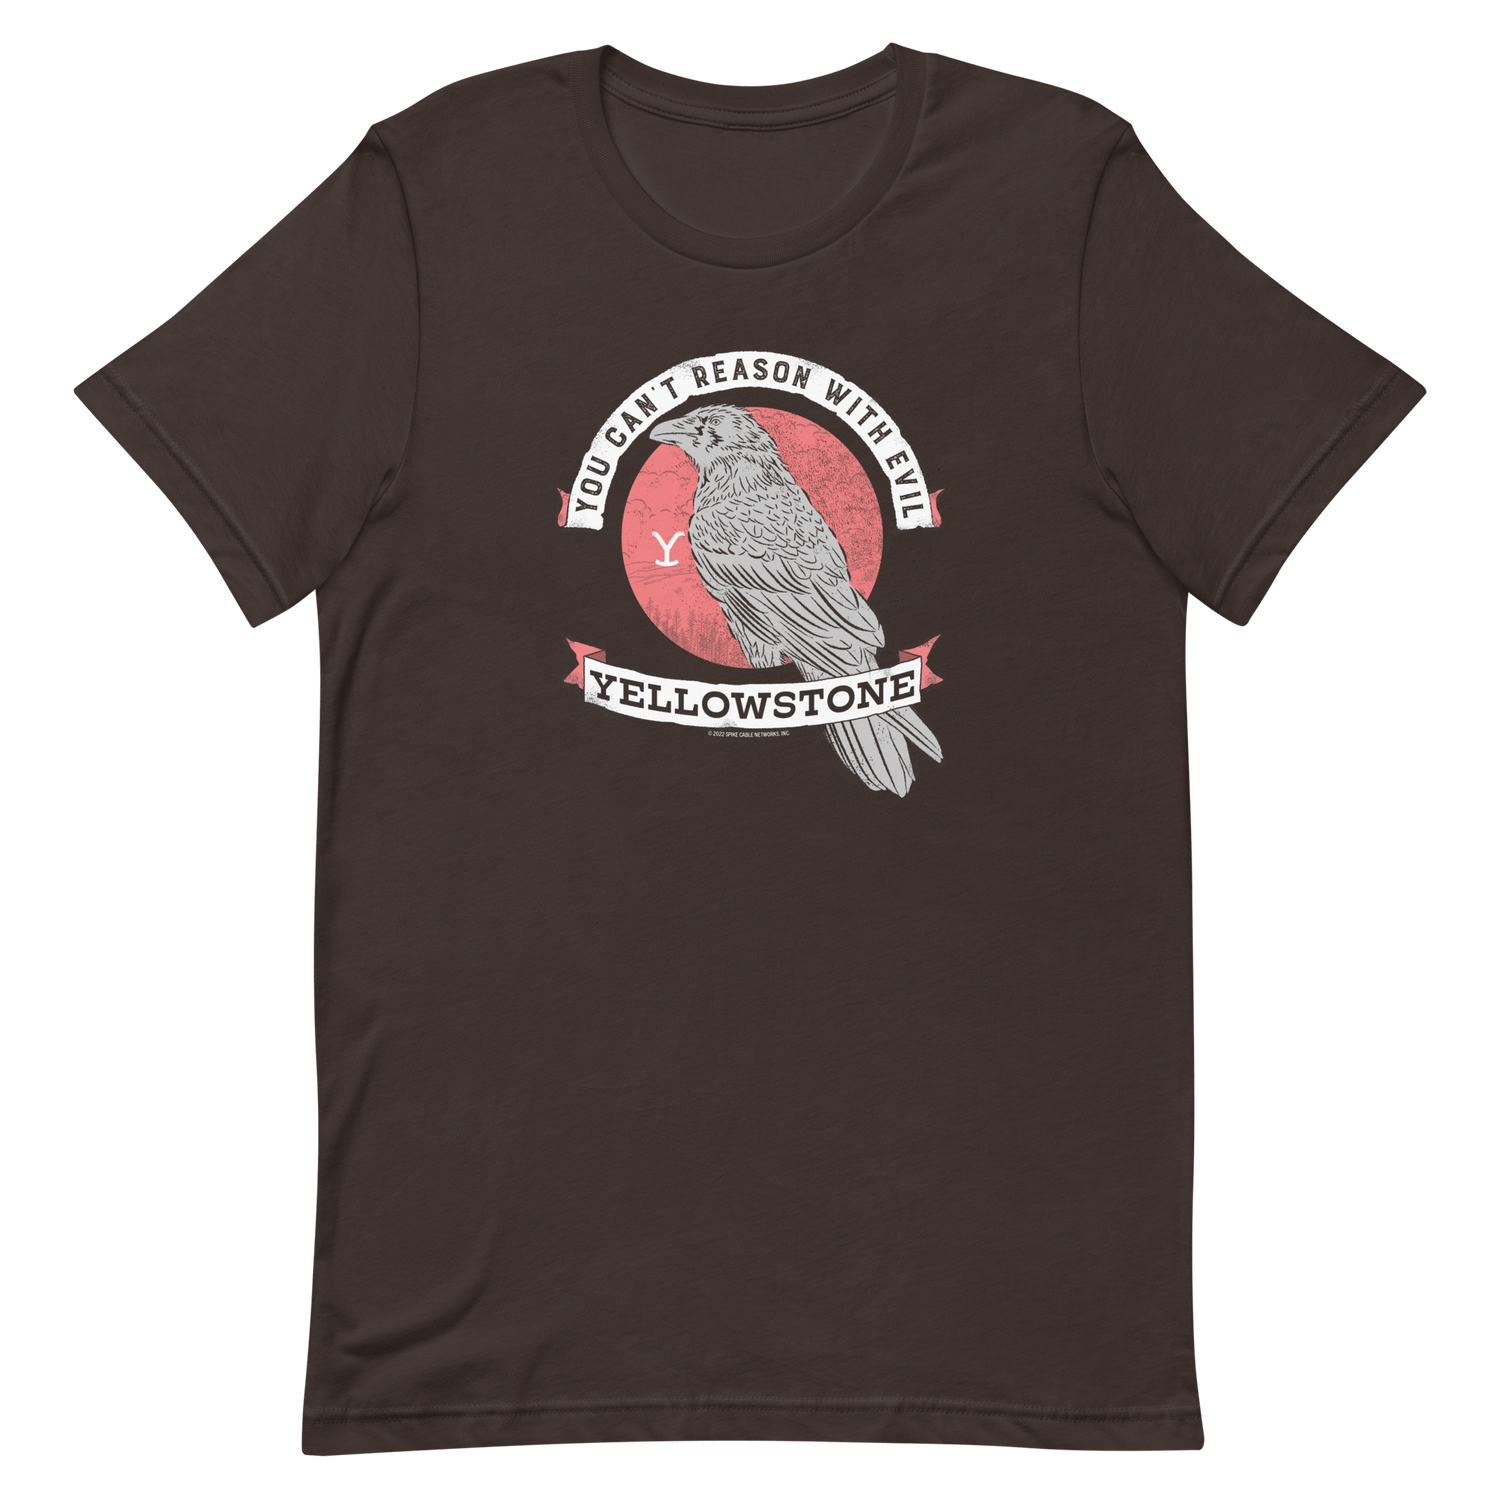 Yellowstone Can't Reason With Evil Front Adult Short Sleeve T - Shirt - Paramount Shop